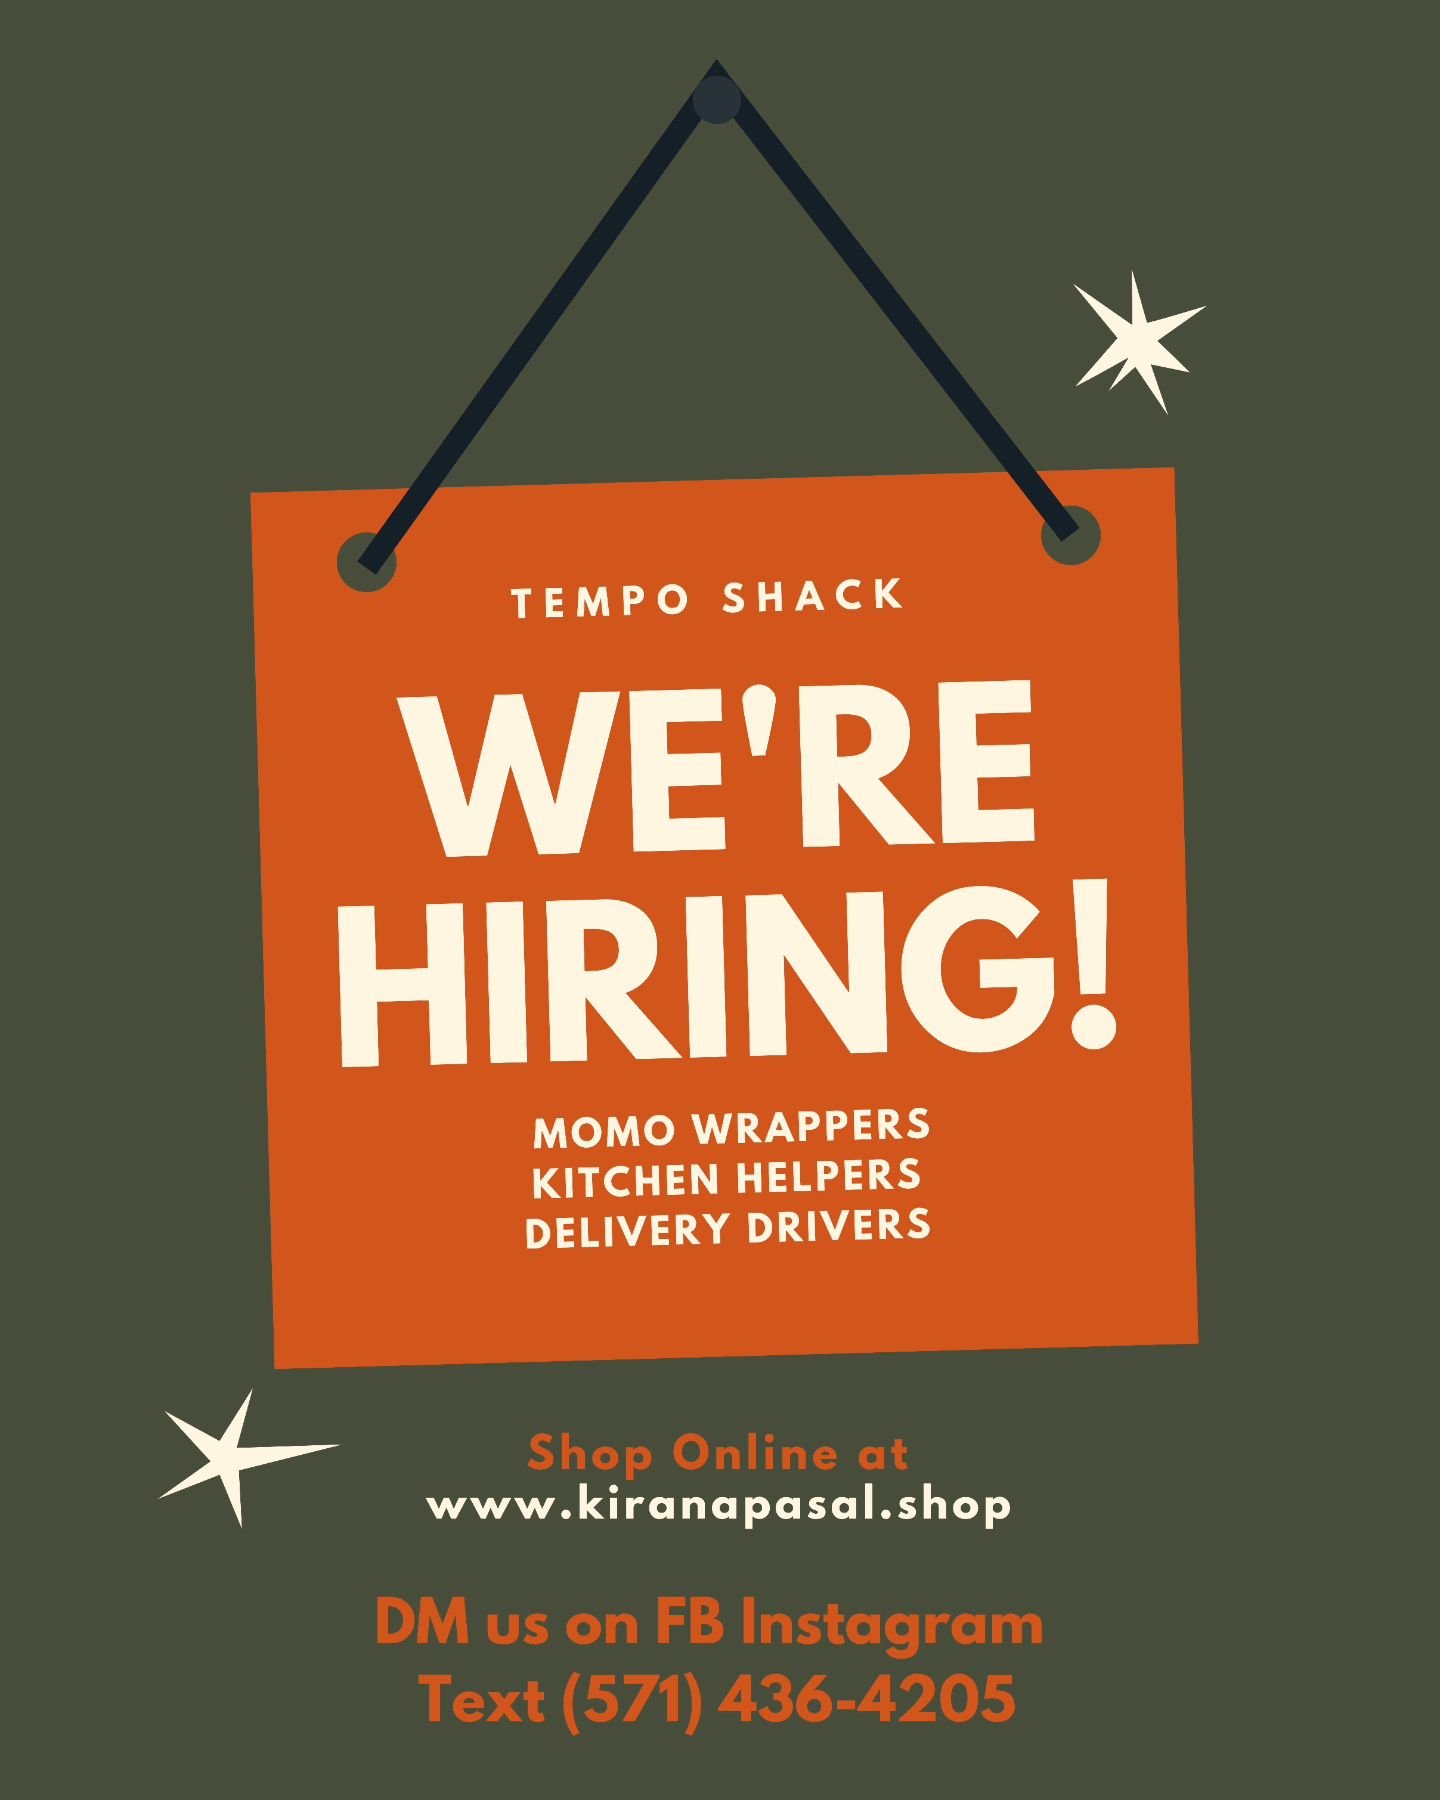 DM us or TEXT us to APPLY ‼️

Momo Wrappers
Kitchen Helpers
Delivery Drivers

We're getting ready for our Grand Opening. 
Stay Tuned for more updates this month 🙌